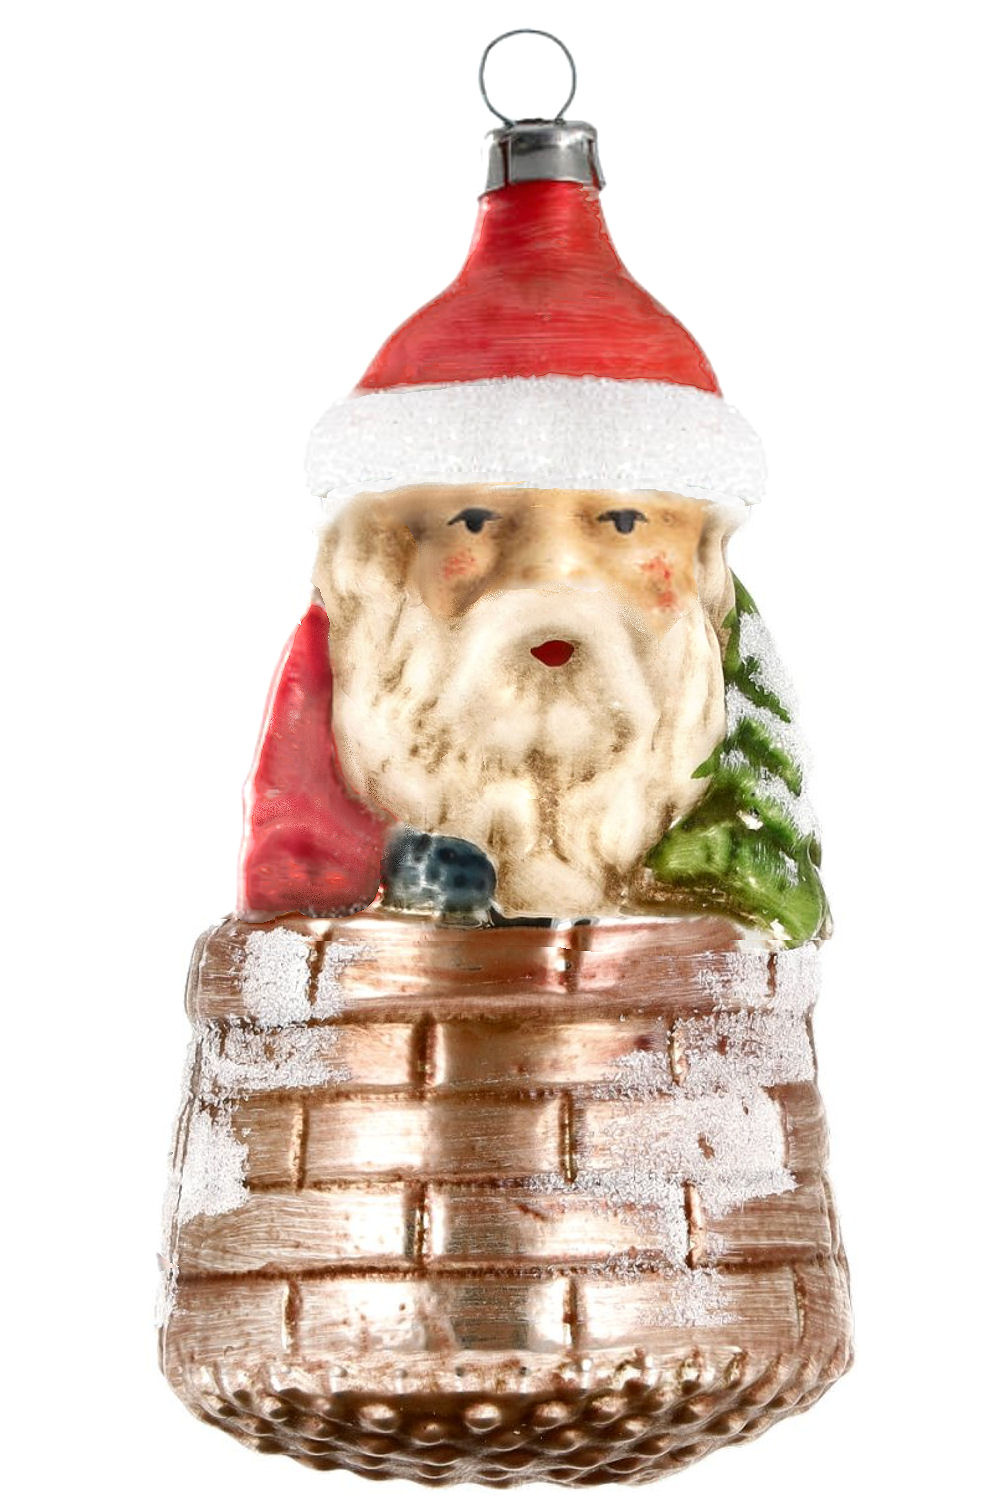 Nicholas with tree in the chimney